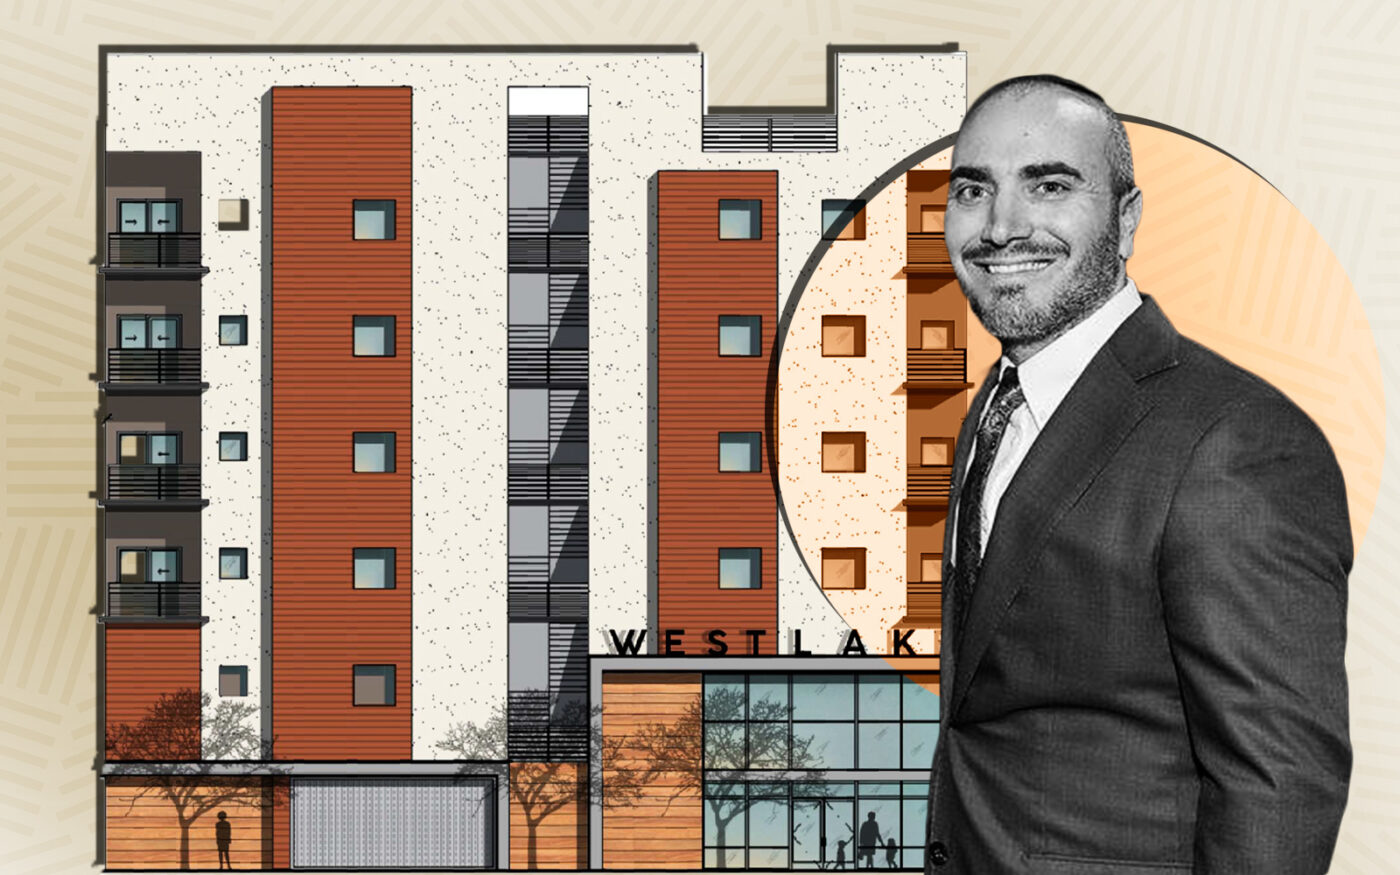 Westland Real Estate Group's Yanki Greenspan with plans for a six-story apartment complex in Central L.A.’s Westlake neighborhood